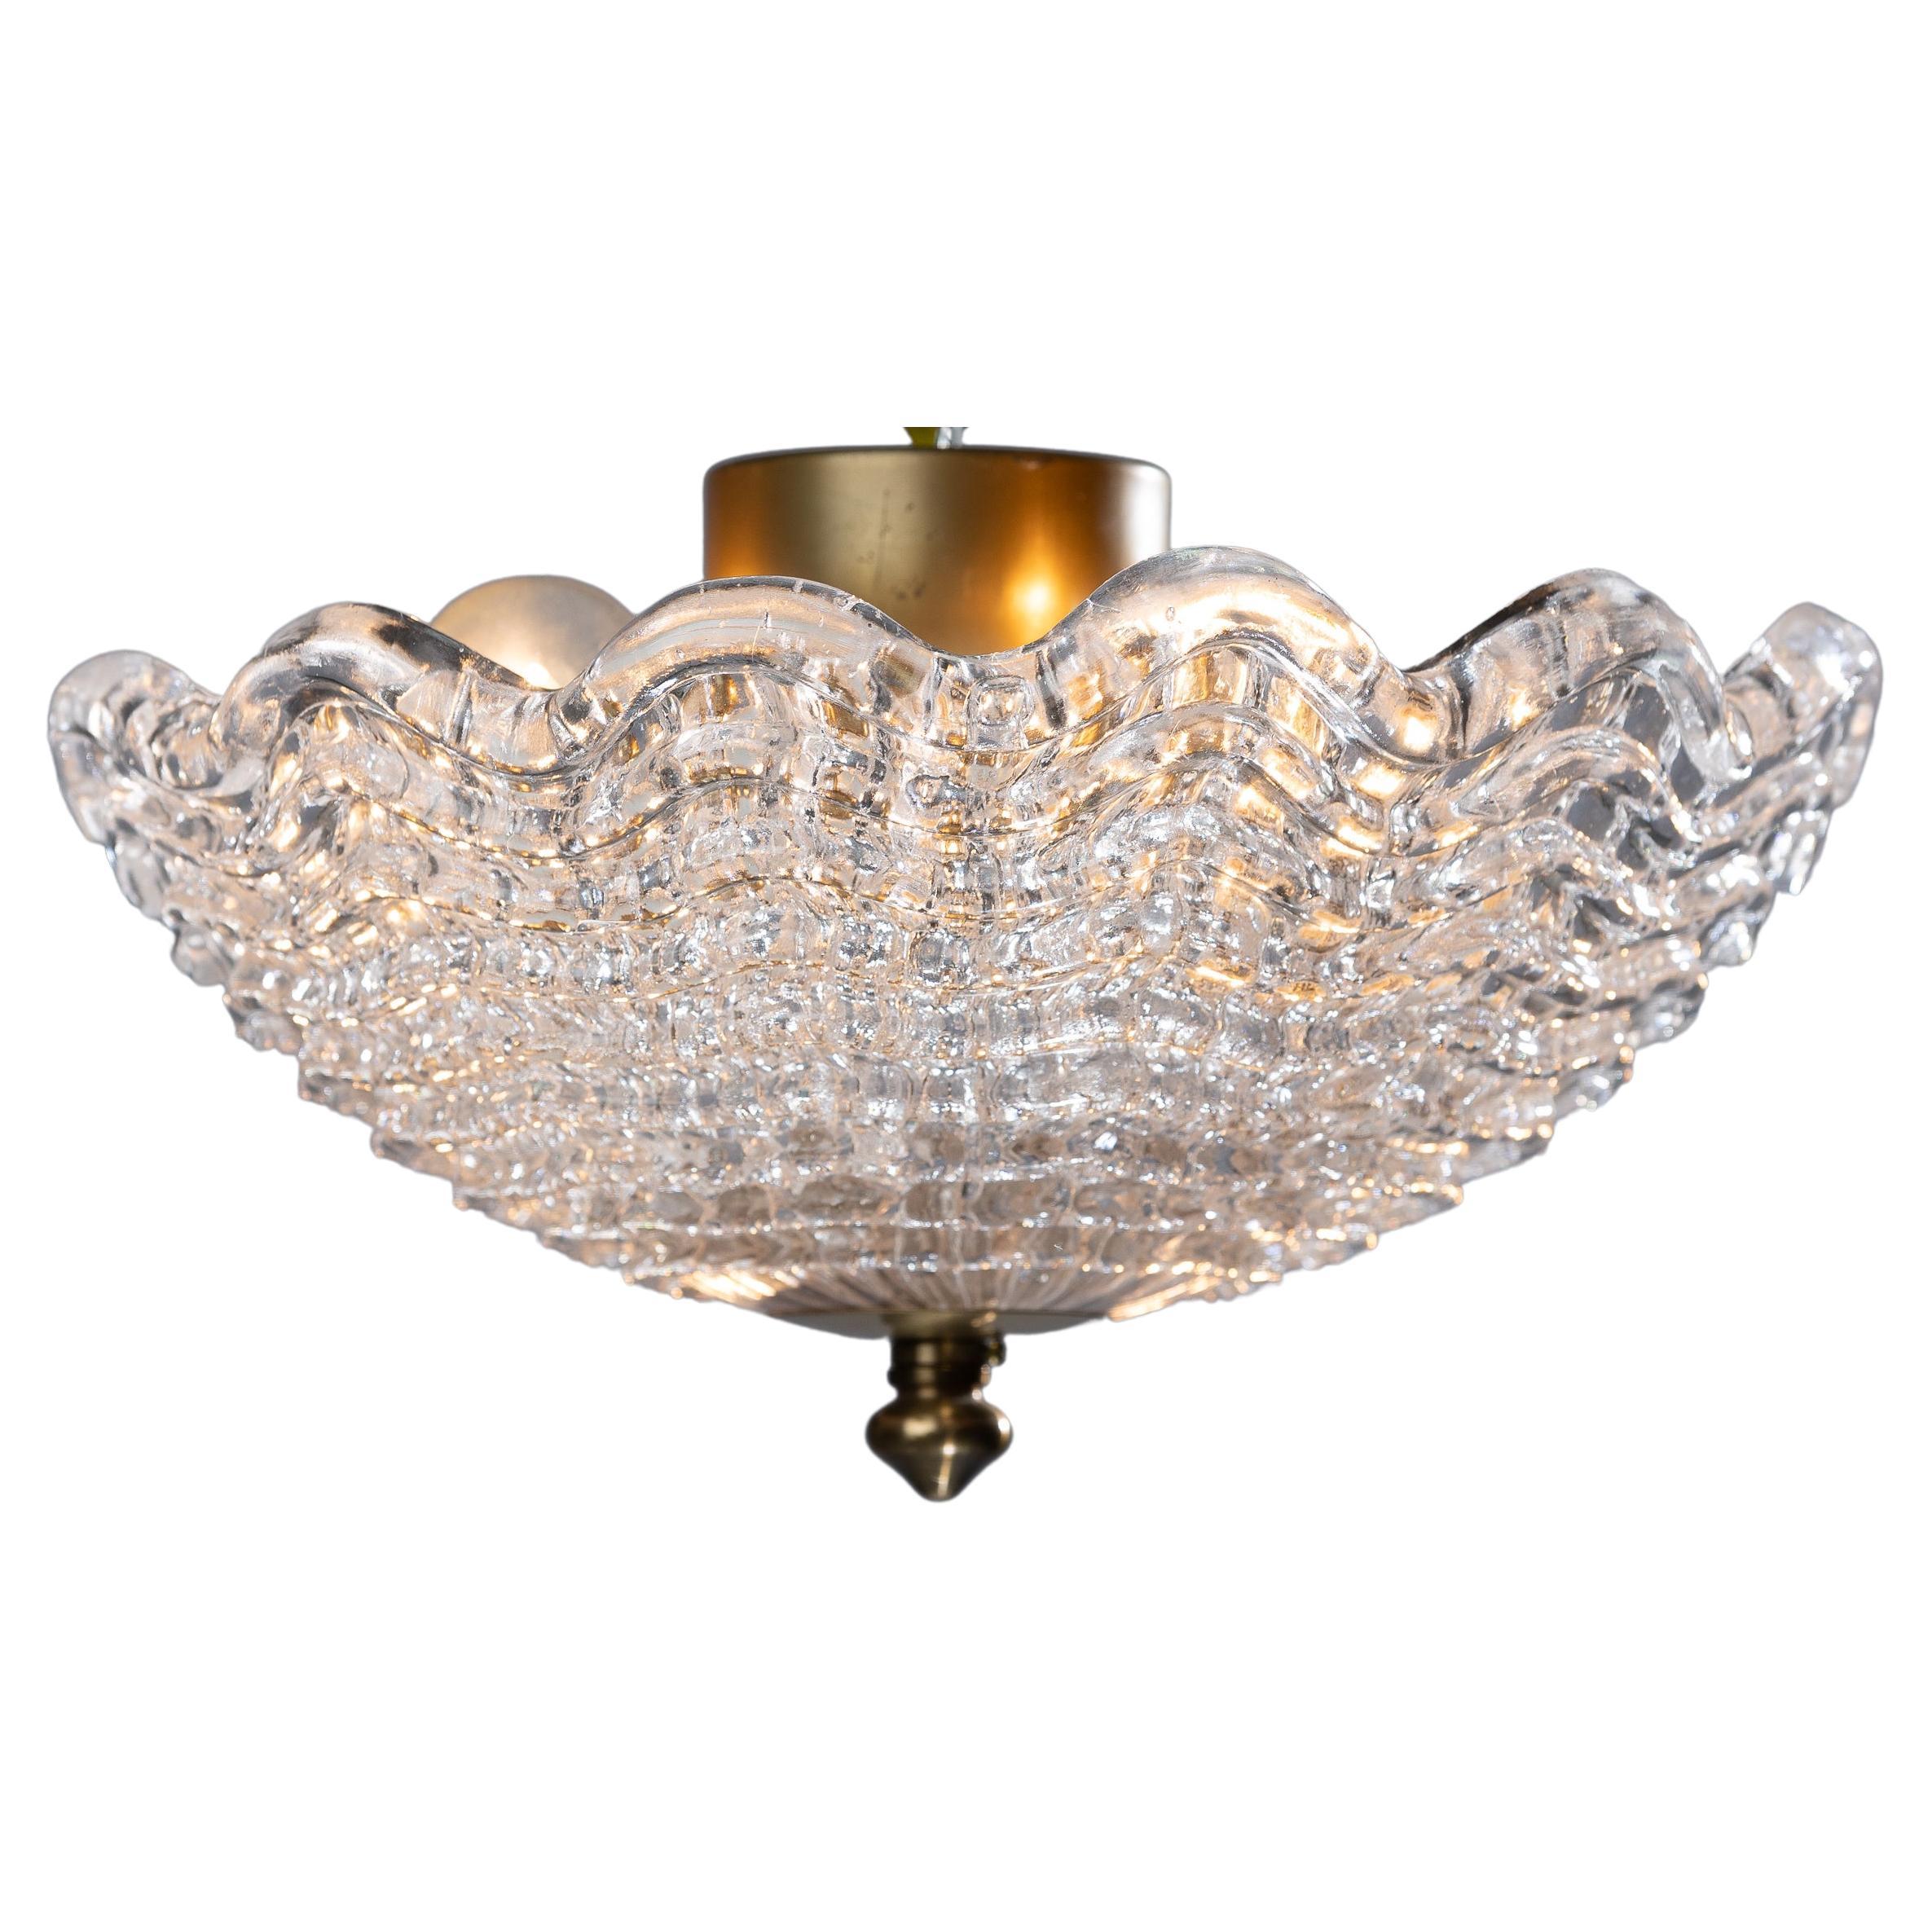 Scandinavian Modern ceiling lamp in pressed glass and brass from Carl Fagerlund